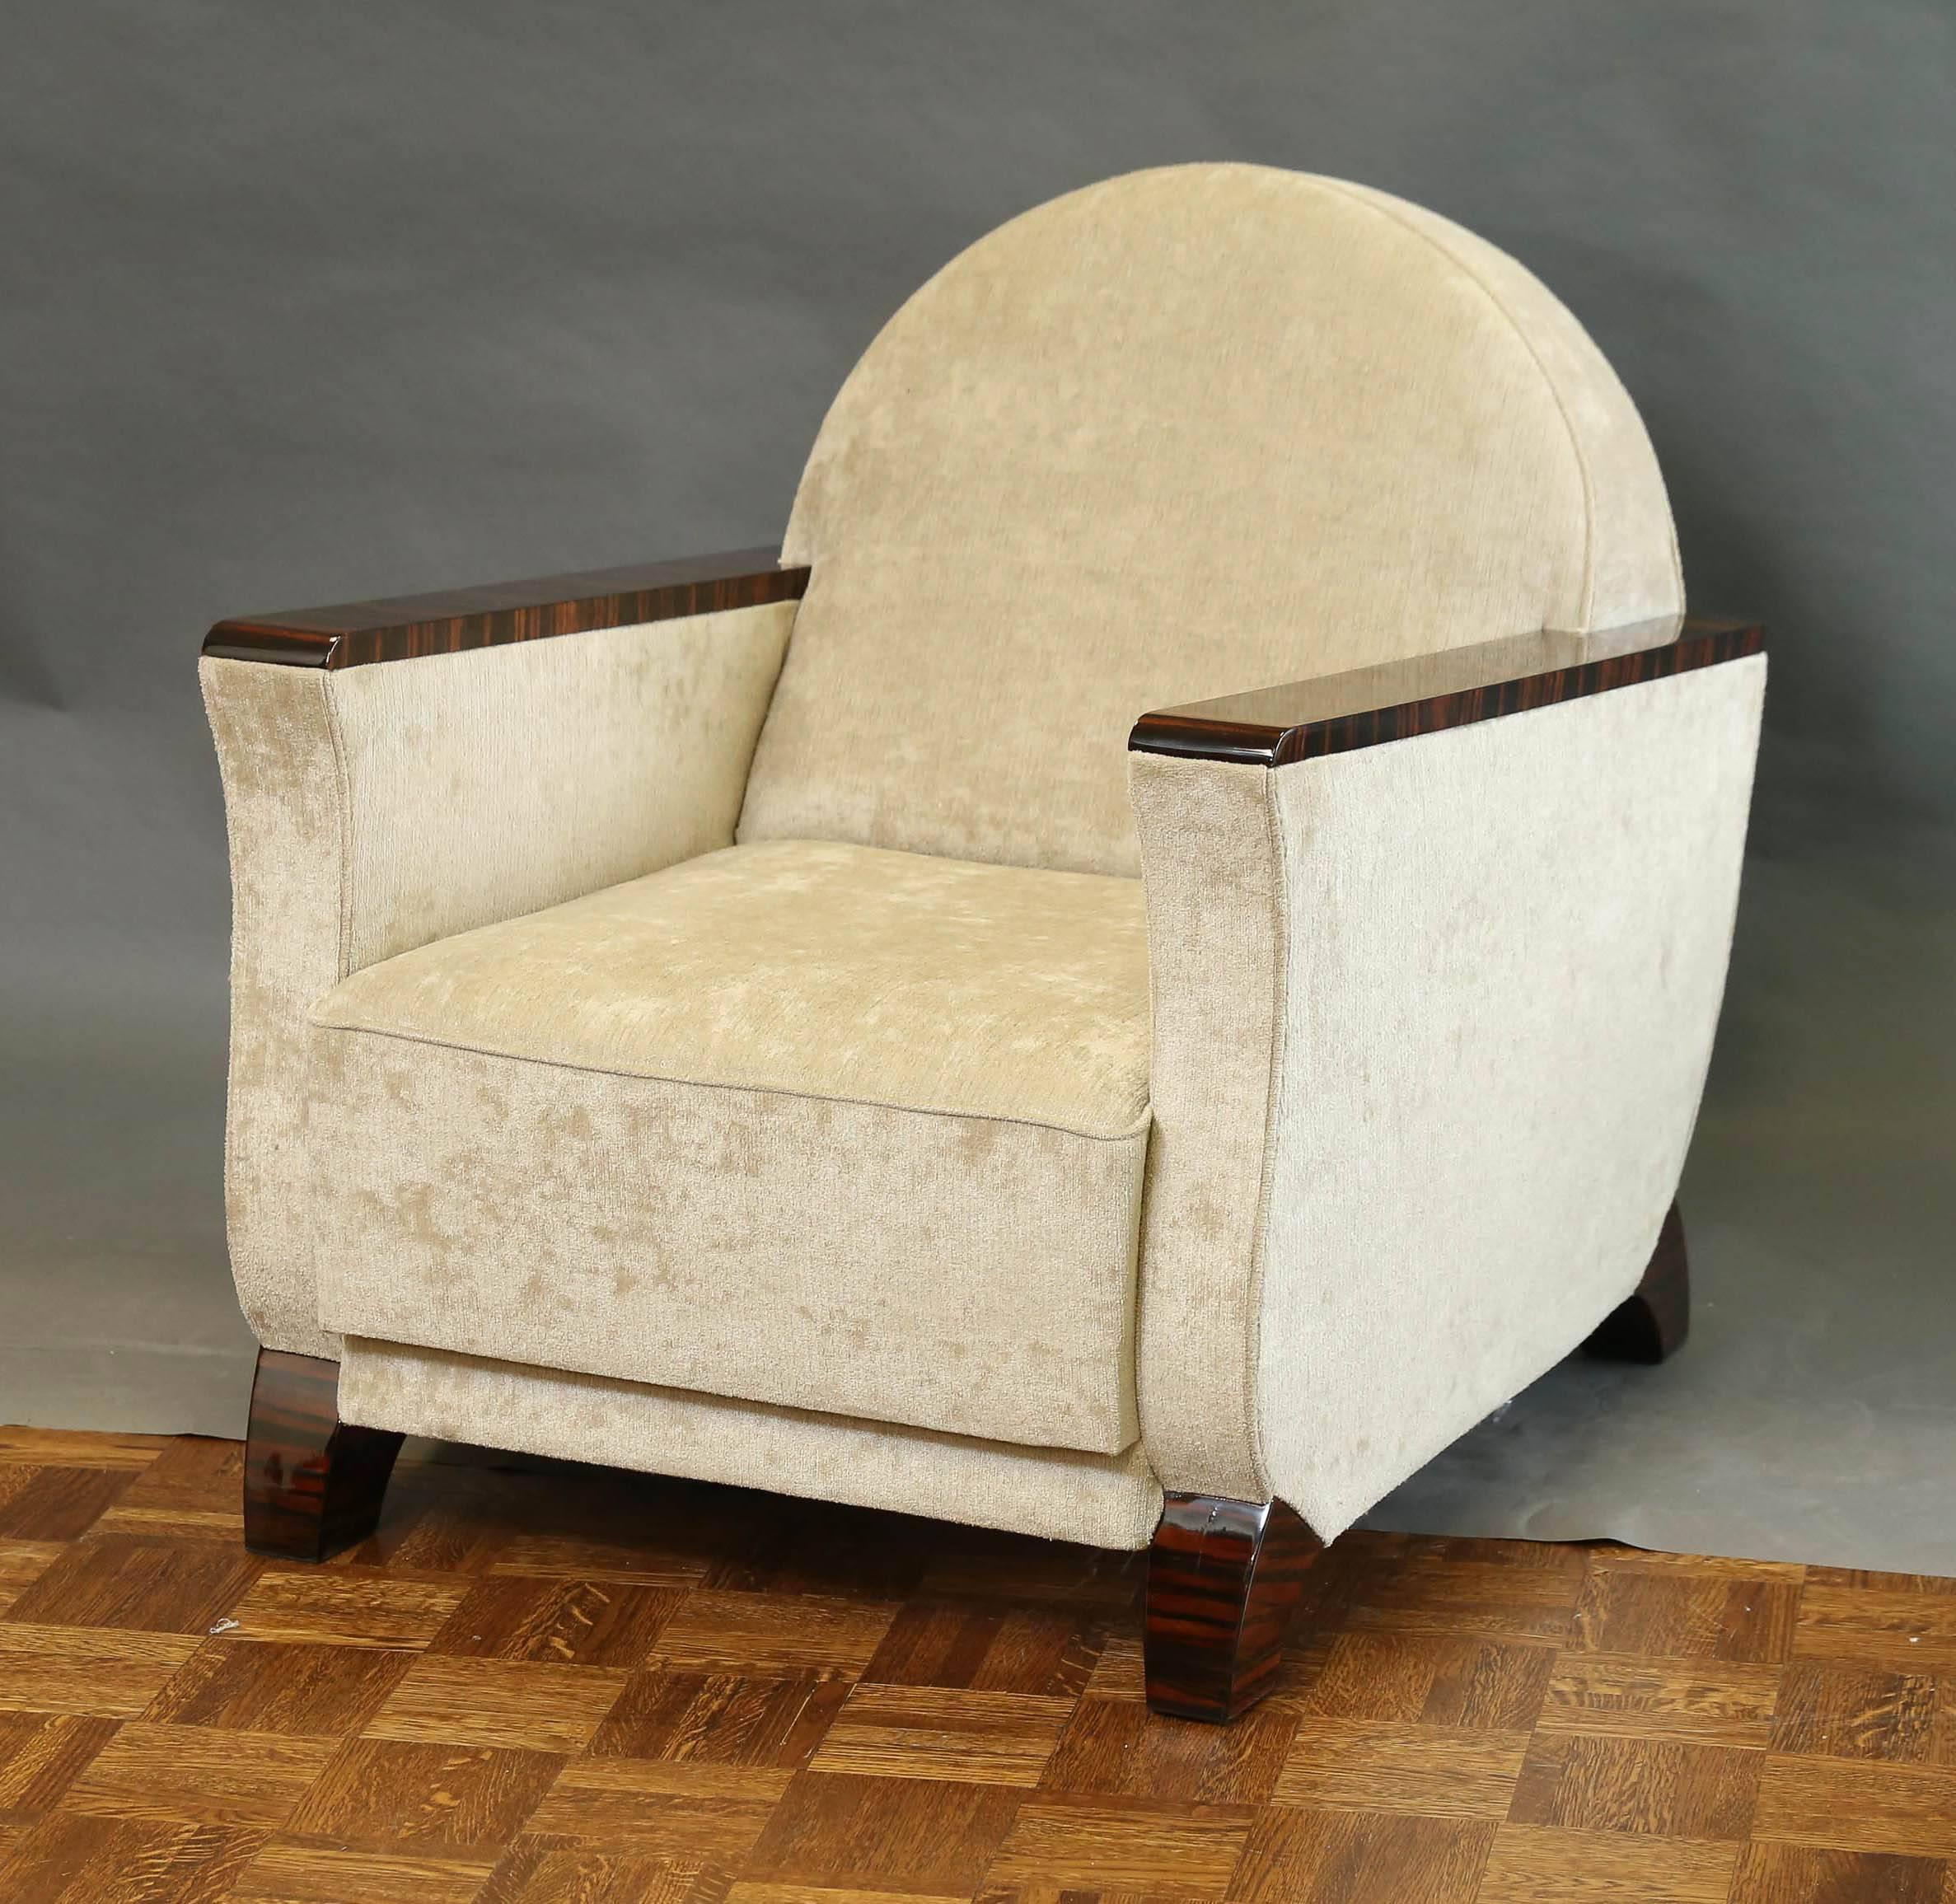 French armchairs are newly re-upholstered in a light grey fabric. Armrests are covered with wooden panels made out of Macassar. Chairs have semi-circular form of back. Chairs are elevated and supported by the Macassar rectangular